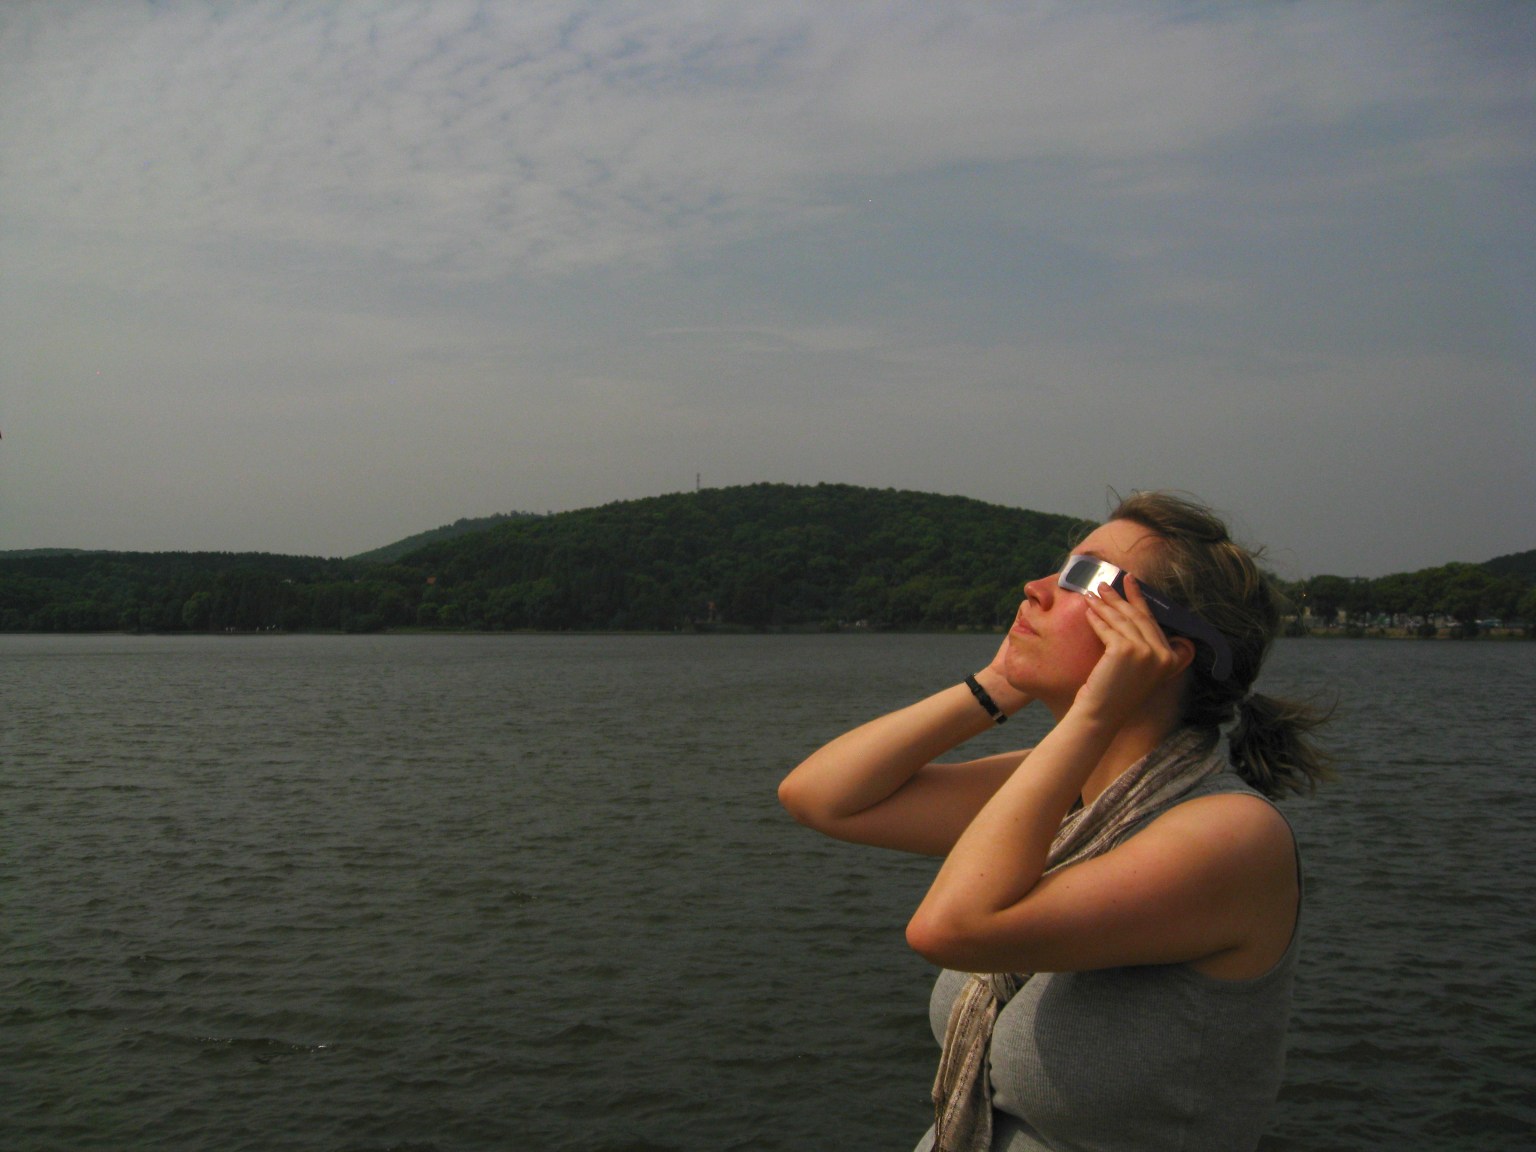 A woman stands in front of a lake, looking up, wearing eclipse glasses.